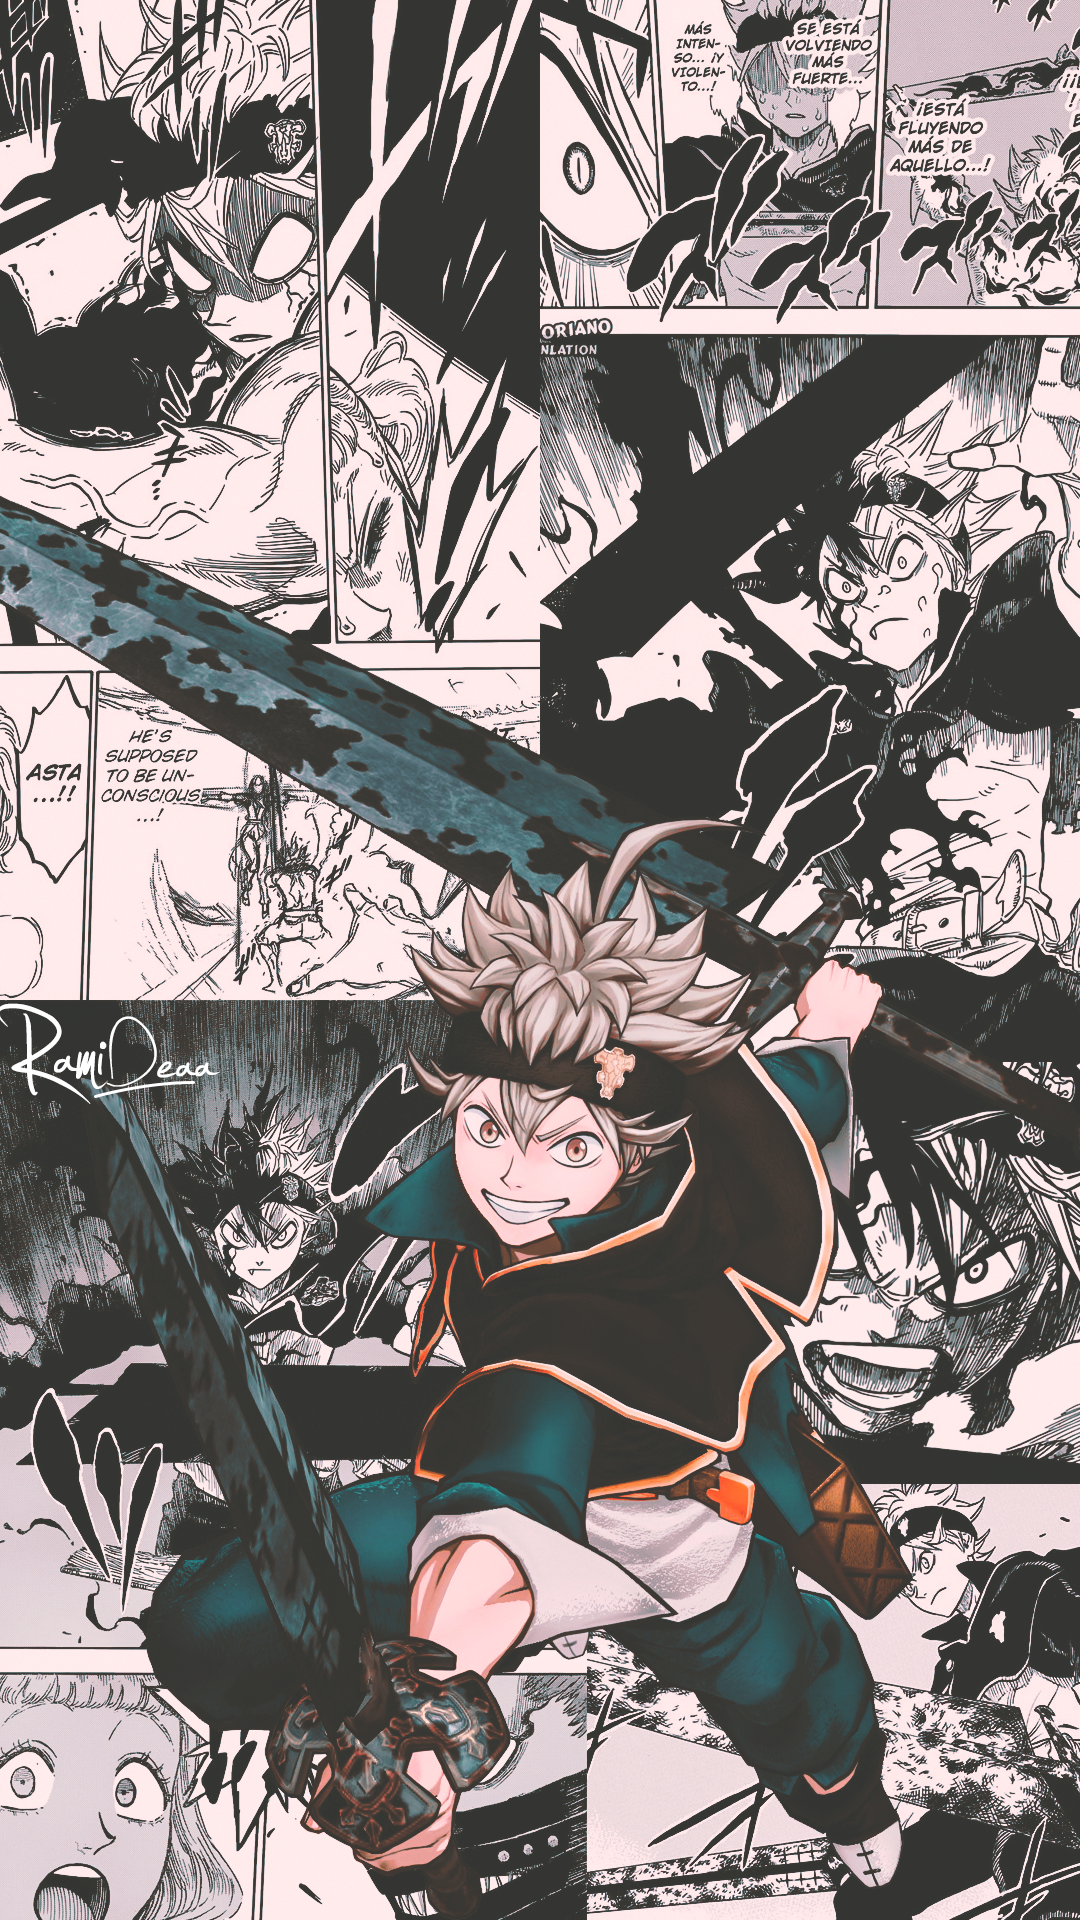  Black  Clover  Aesthetic  Wallpapers  Wallpaper  Cave